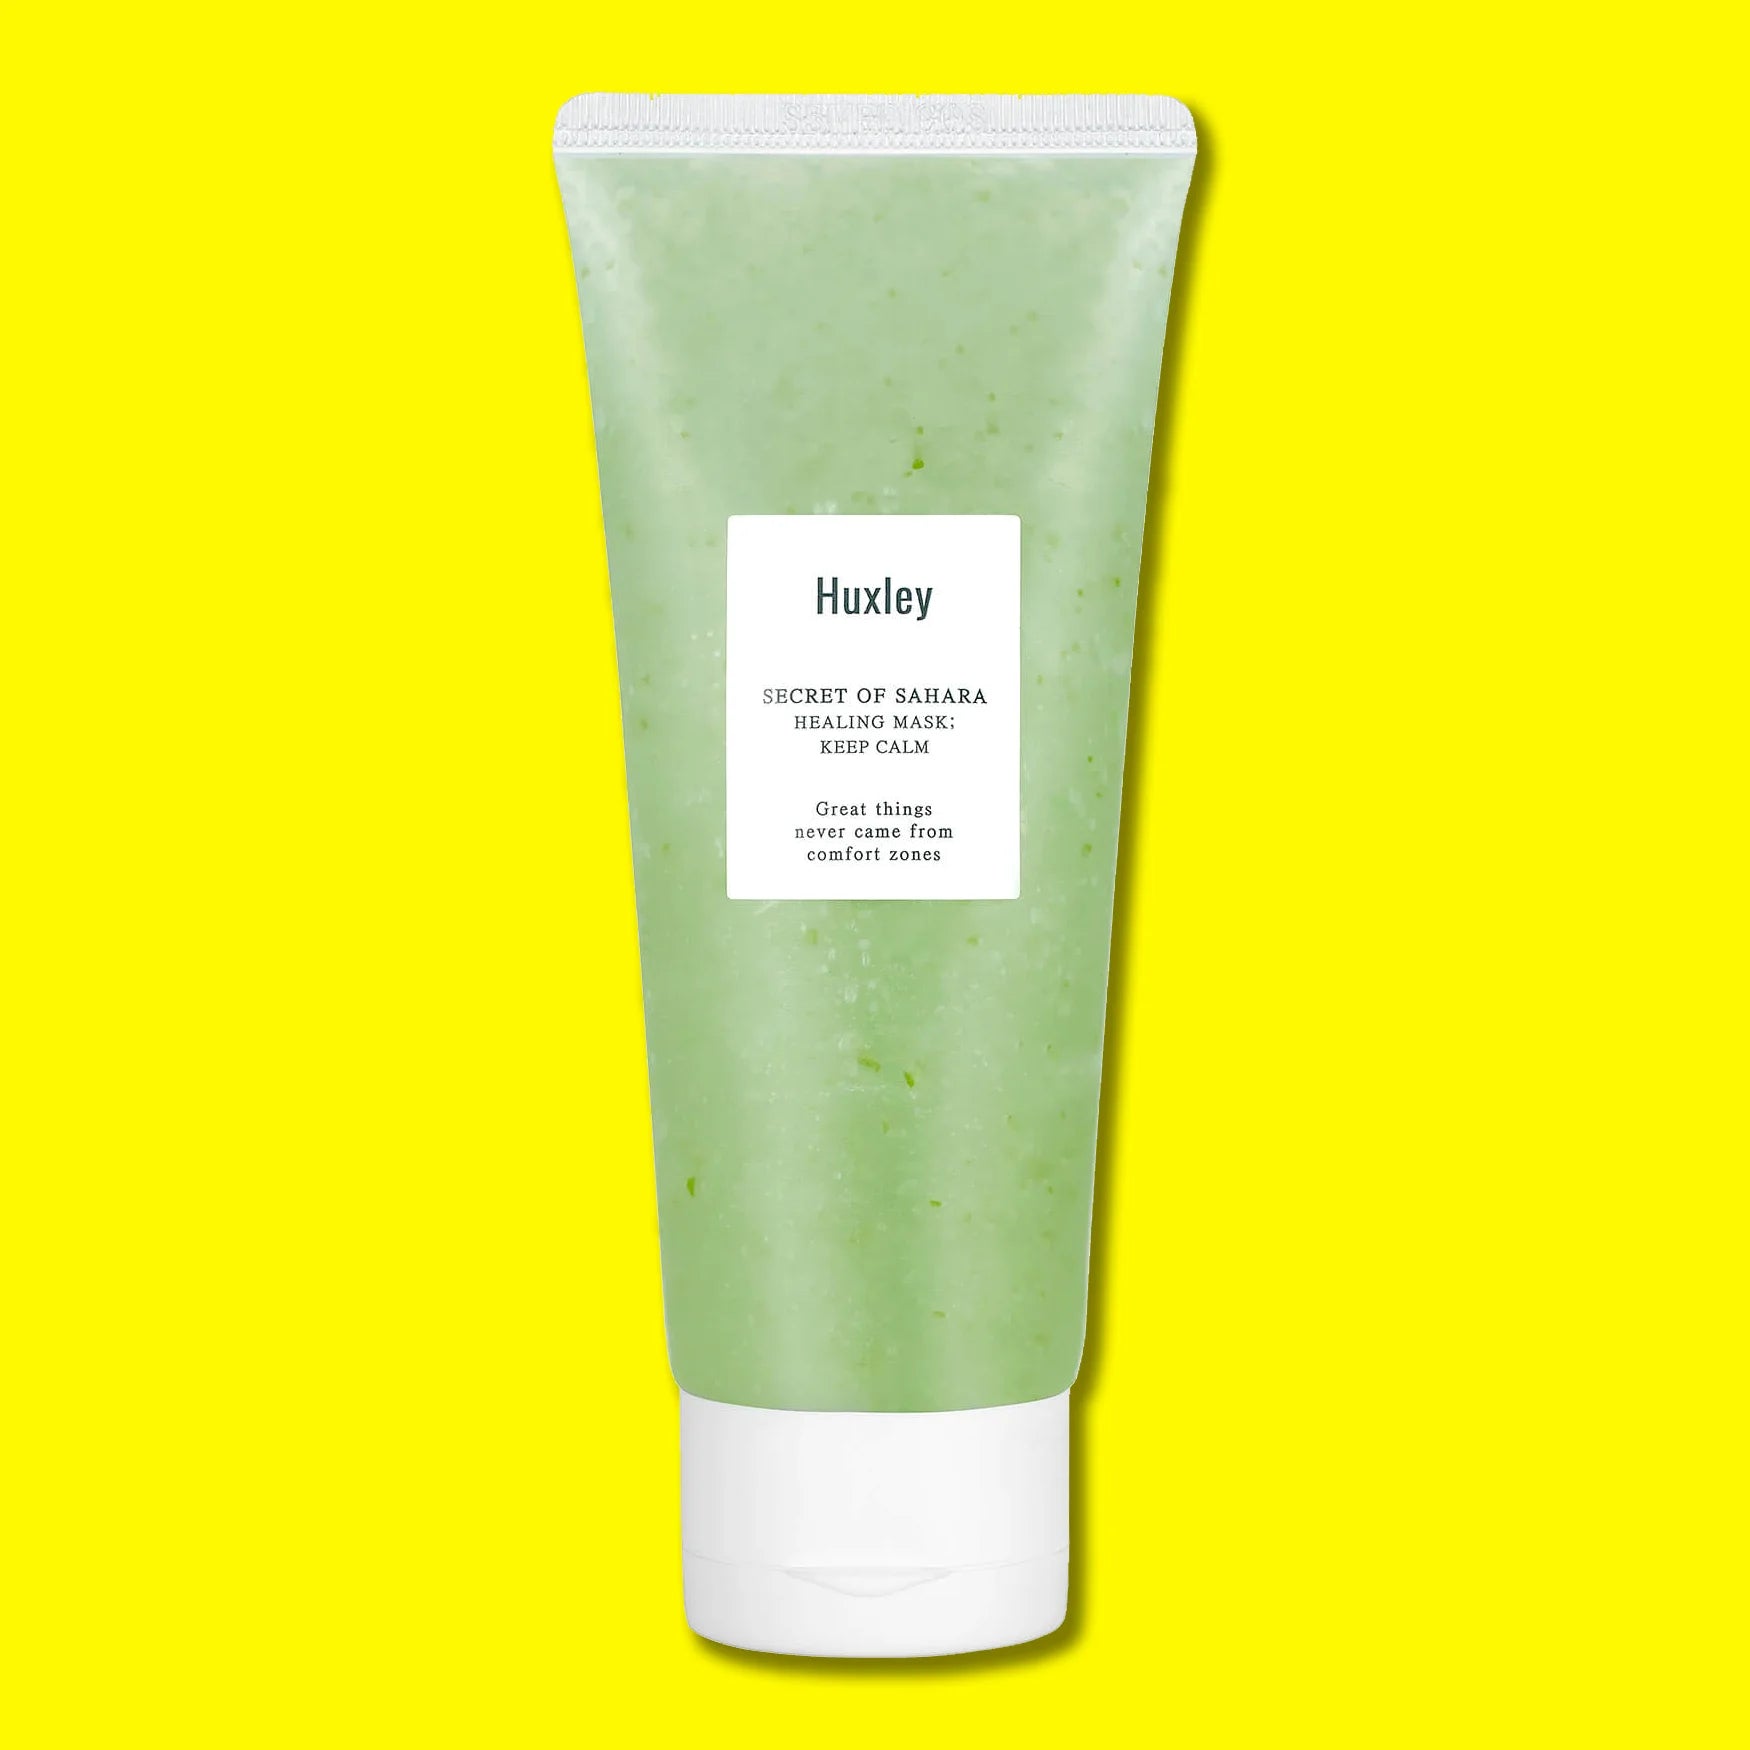 Huxley Keep Calm Healing Mask wash-off soothing face care dry sensitive skin anti-aging self care spa at home K Beauty World